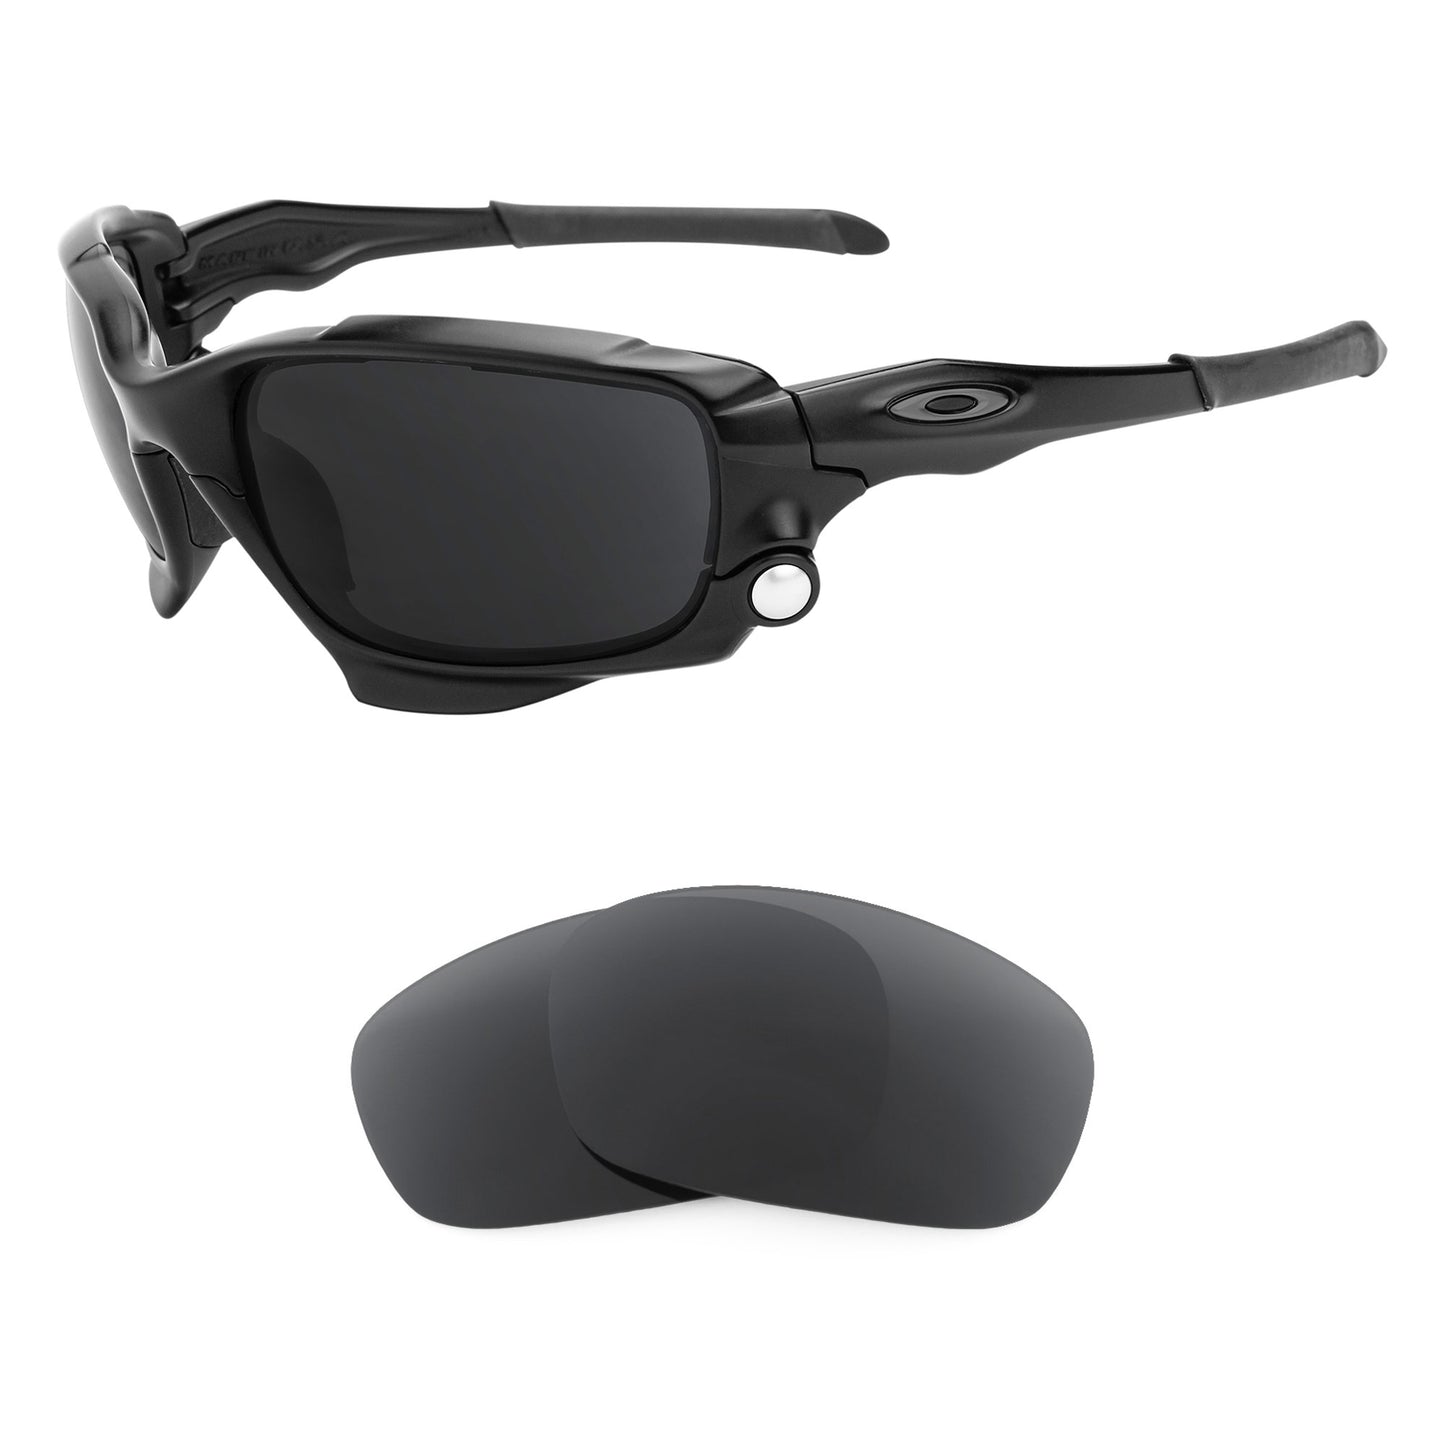 Oakley Jawbone (Low Bridge Fit) sunglasses with replacement lenses